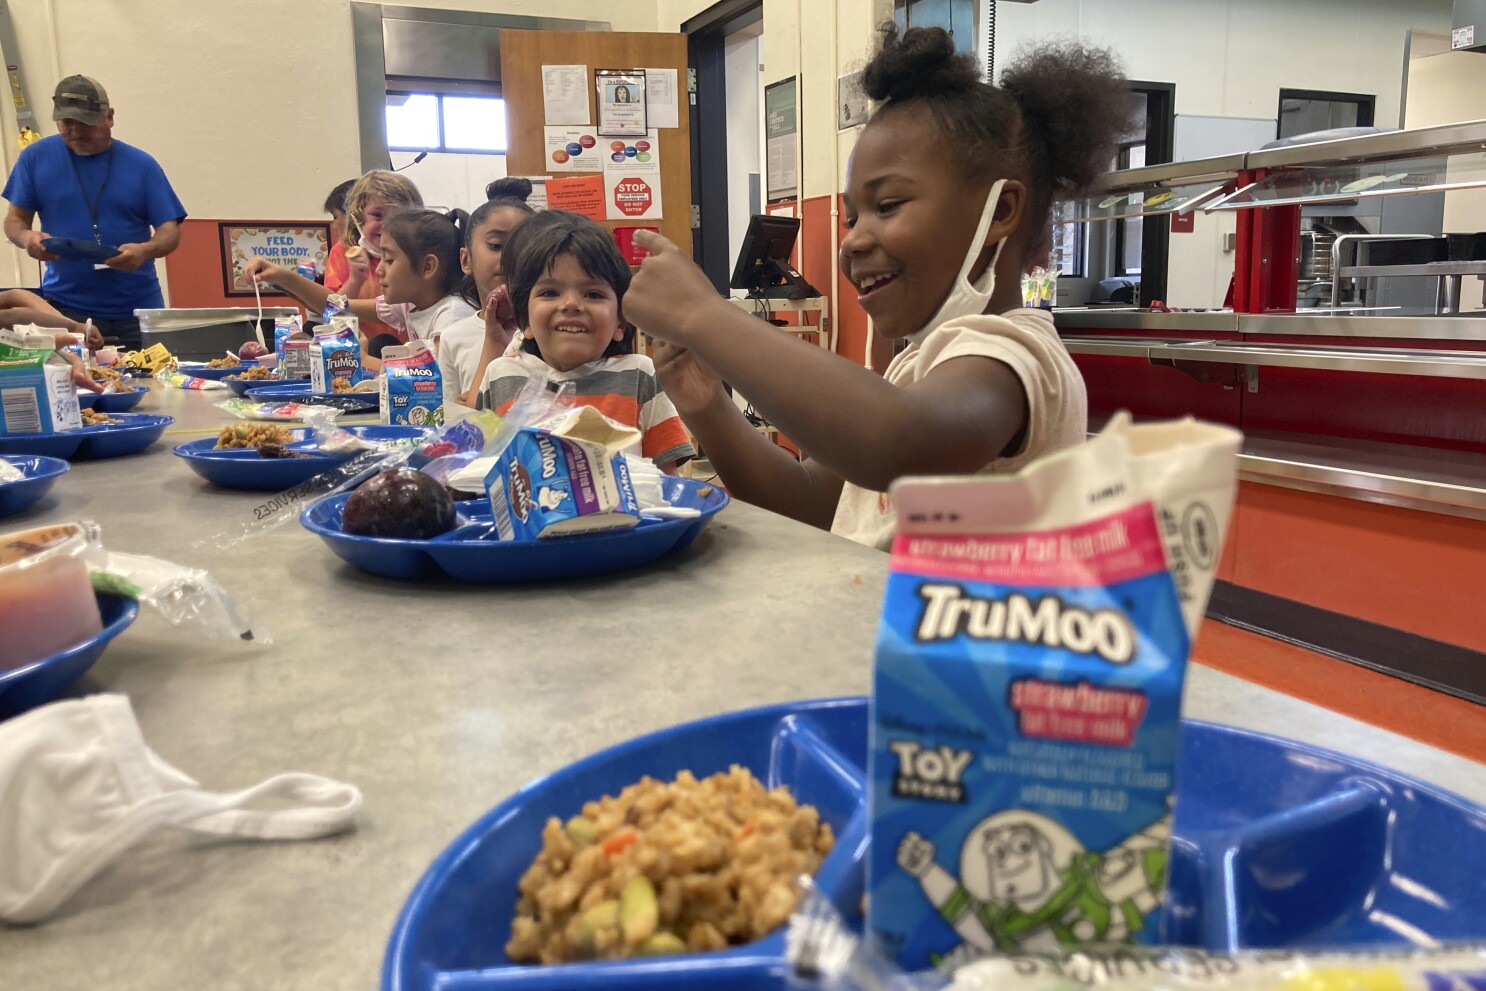 Six States Have Made School Meals Free to All Students. Will More Follow?